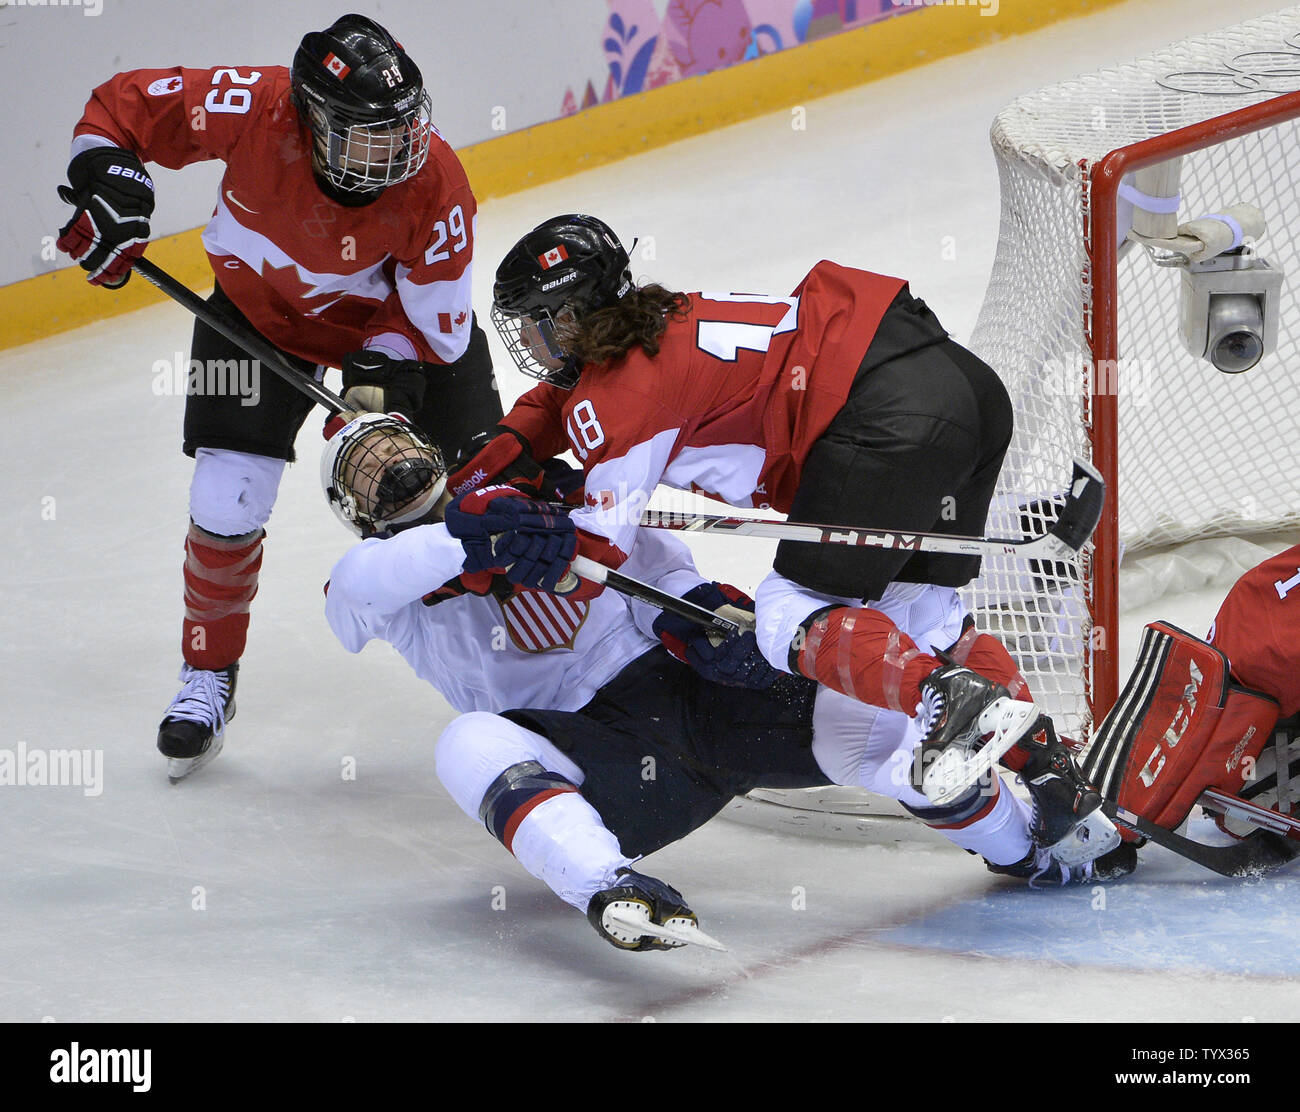 Canada's Catherine Ward cross checks United States' Anne Schleper during  overtime of the women's gold medal ice hockey game at the Sochi 2014 Winter  Olympics on February 20, 2014 in Sochi, Russia.